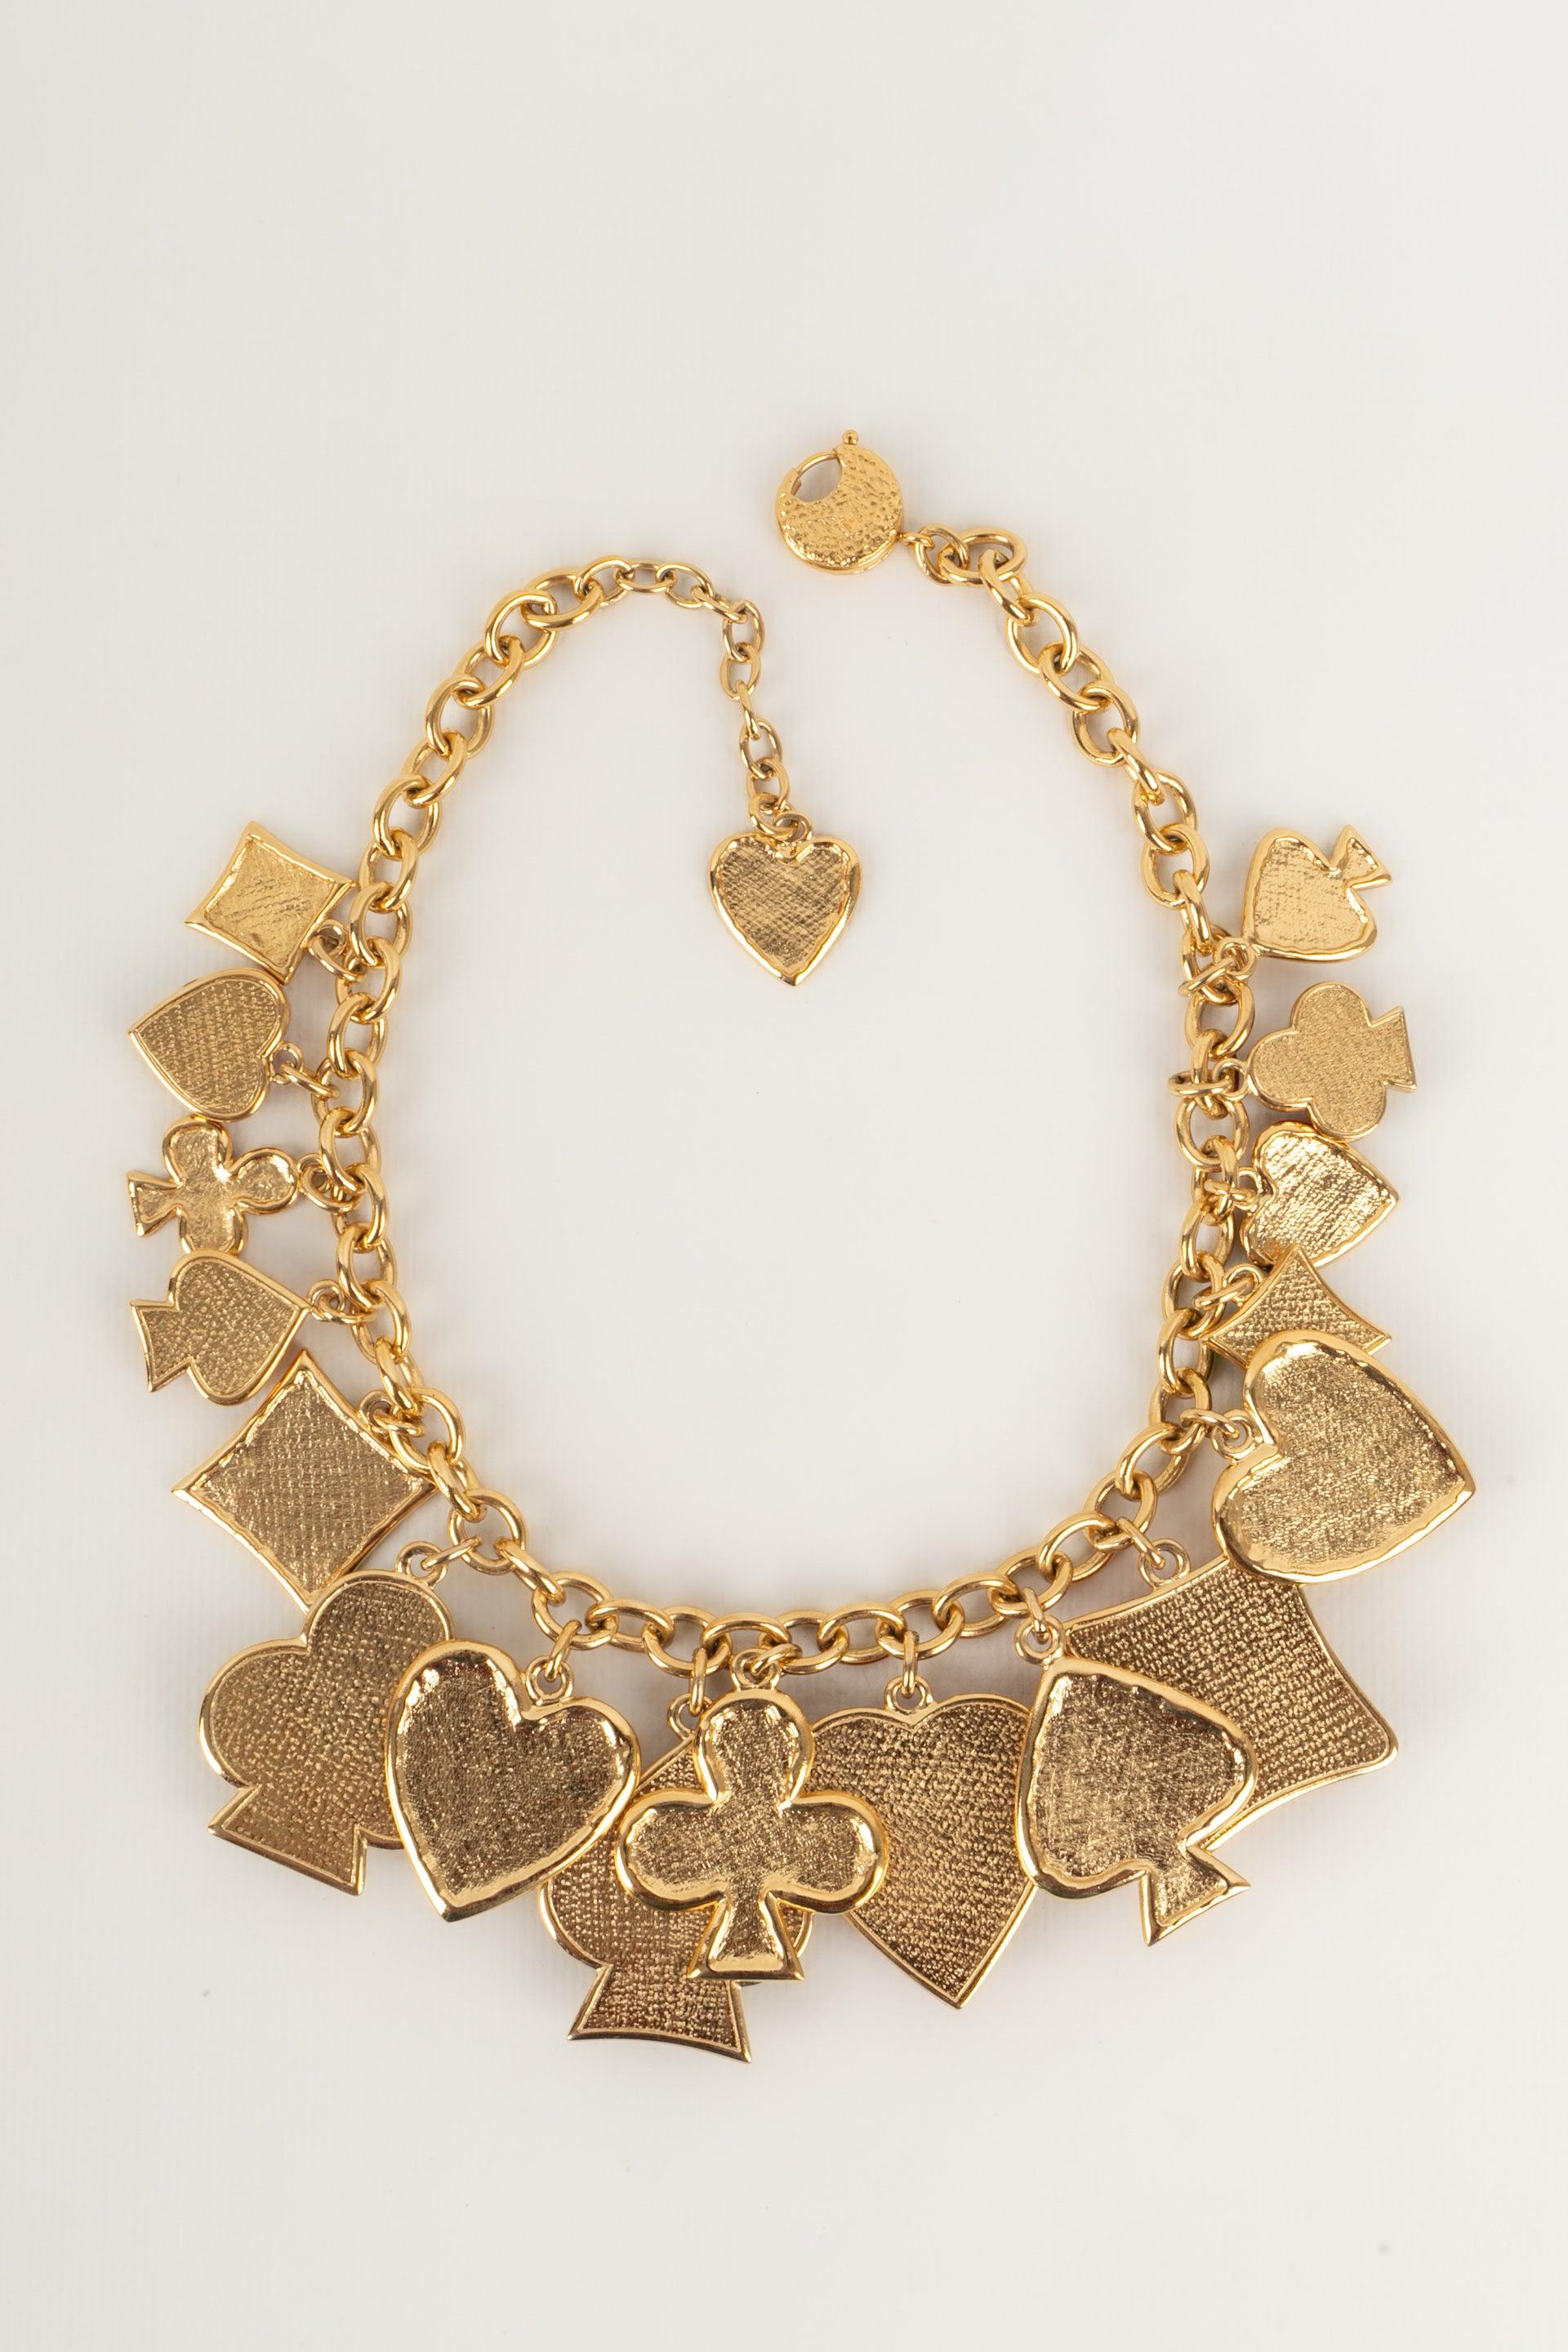 Yves Saint Laurent Golden Metal and Resin Charm Necklace For Sale 3